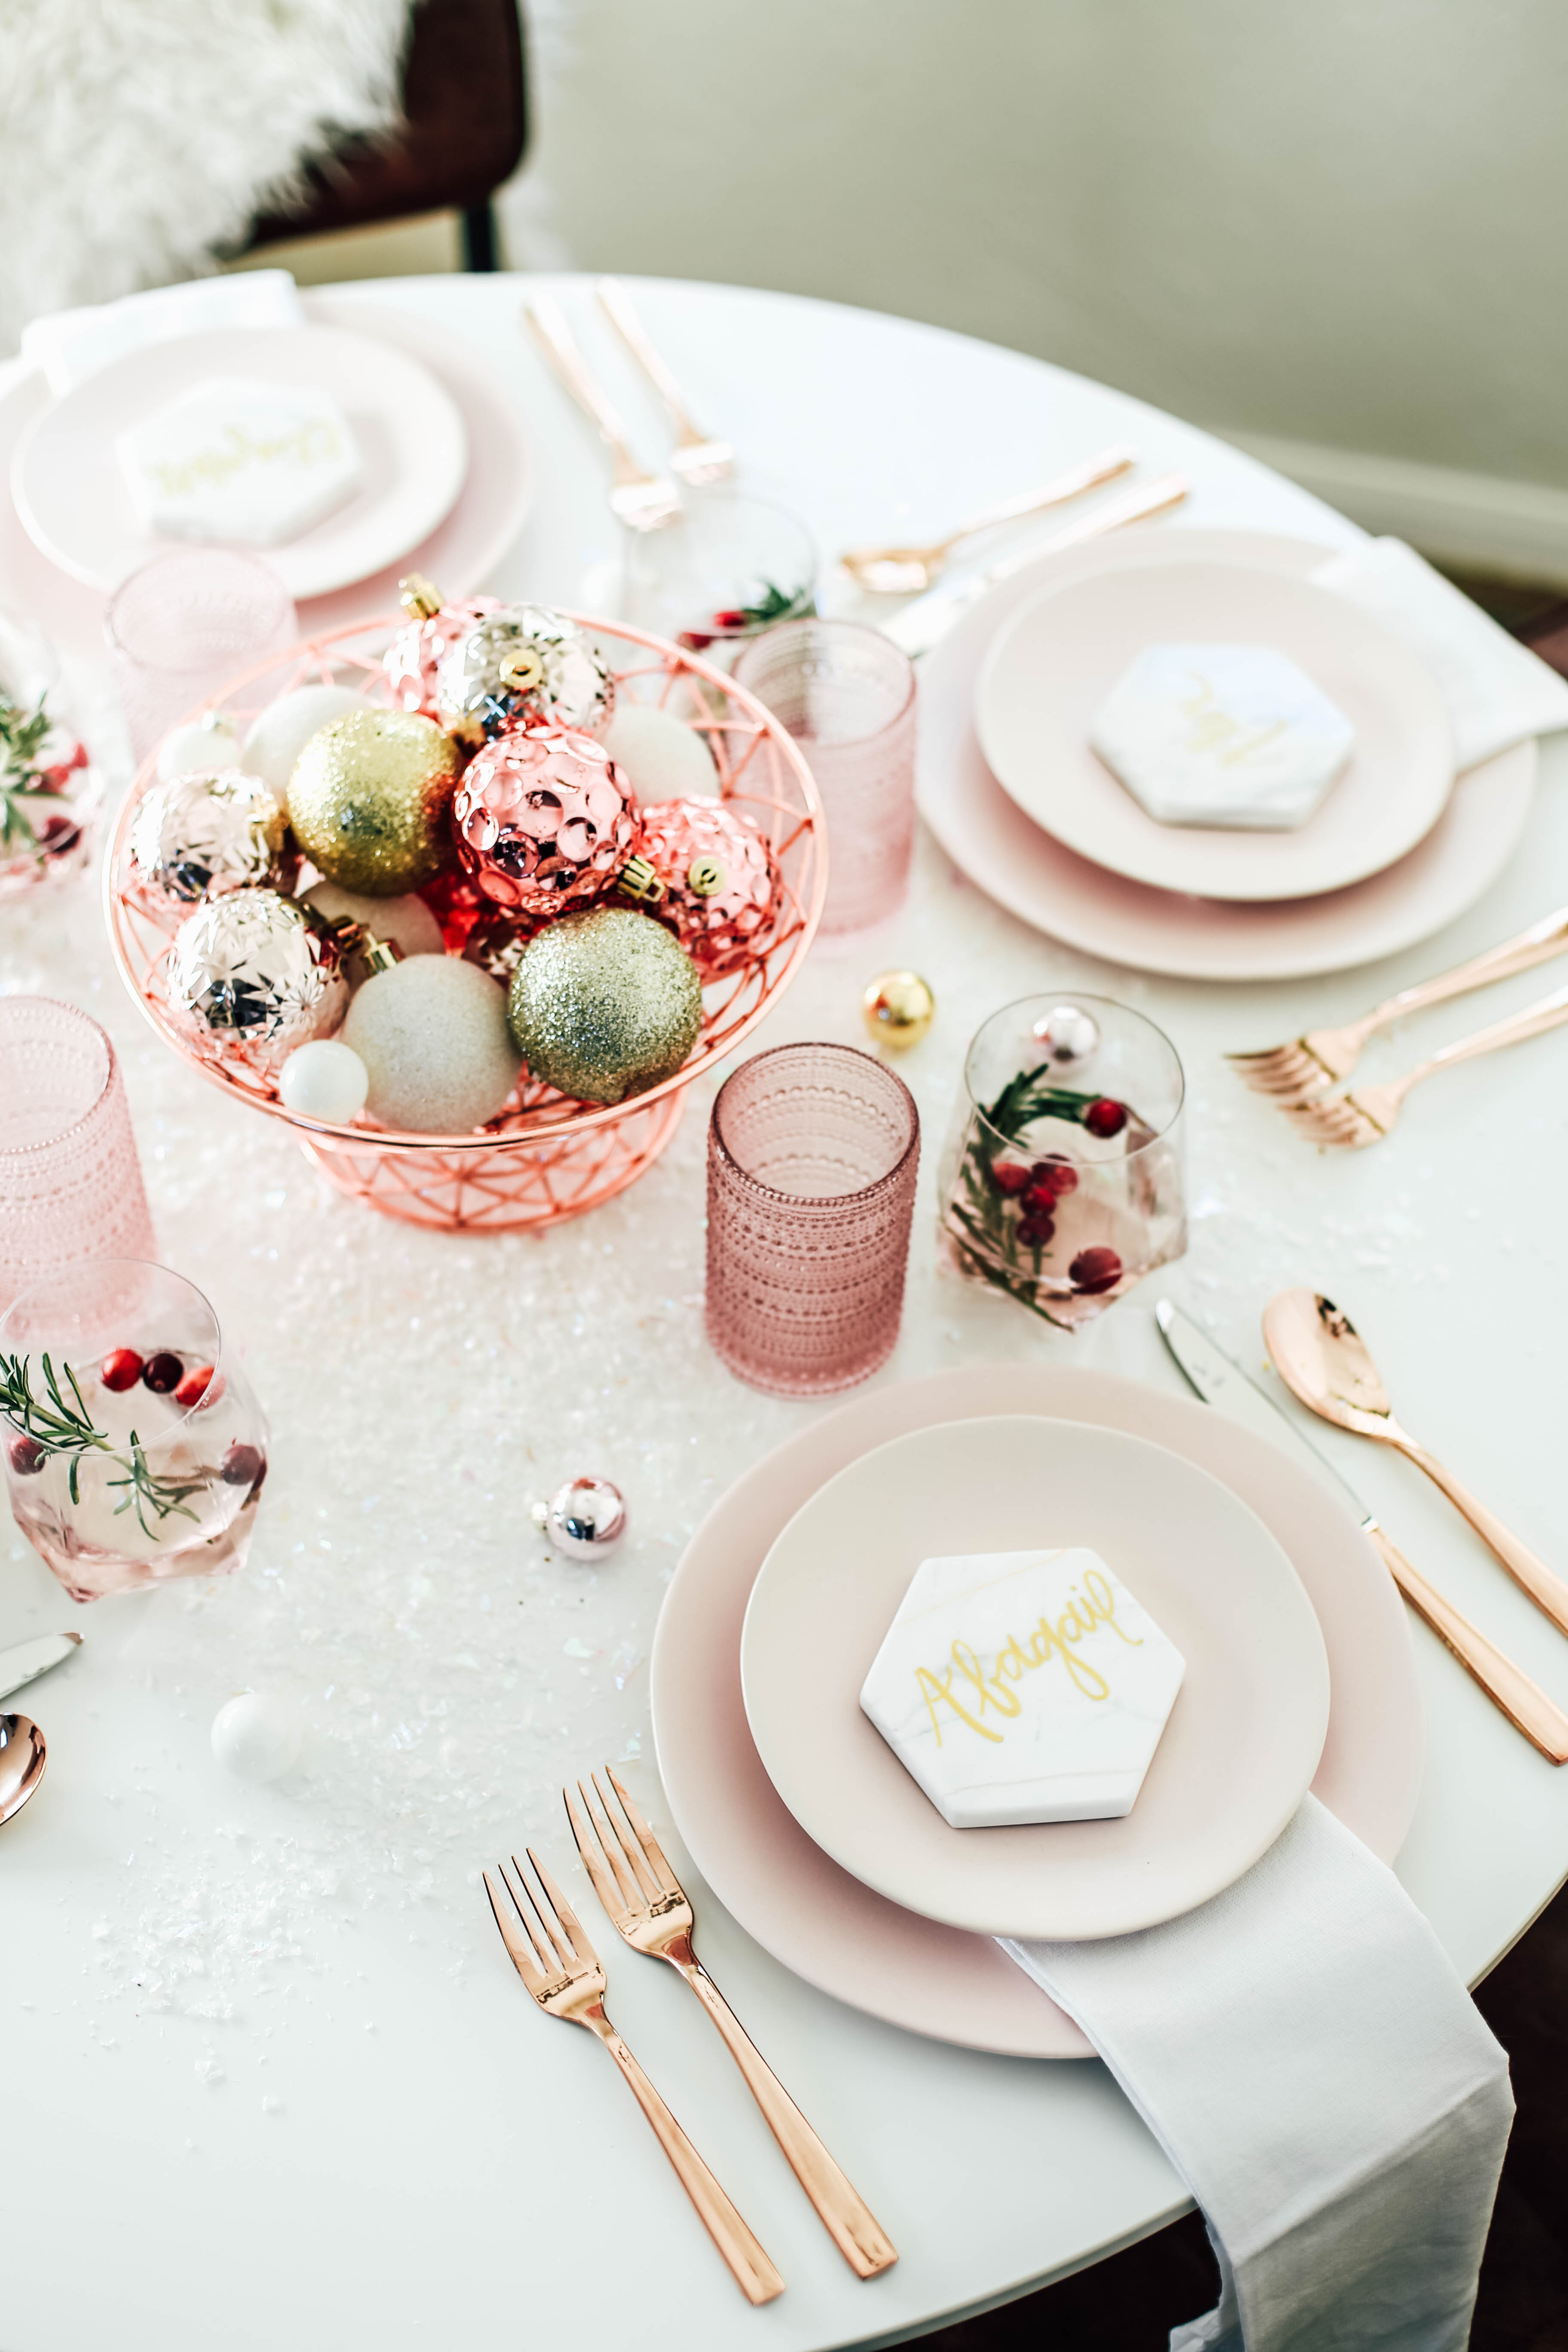 A Festive Millennial Pink Table Setting for the Holiday Season | The ...